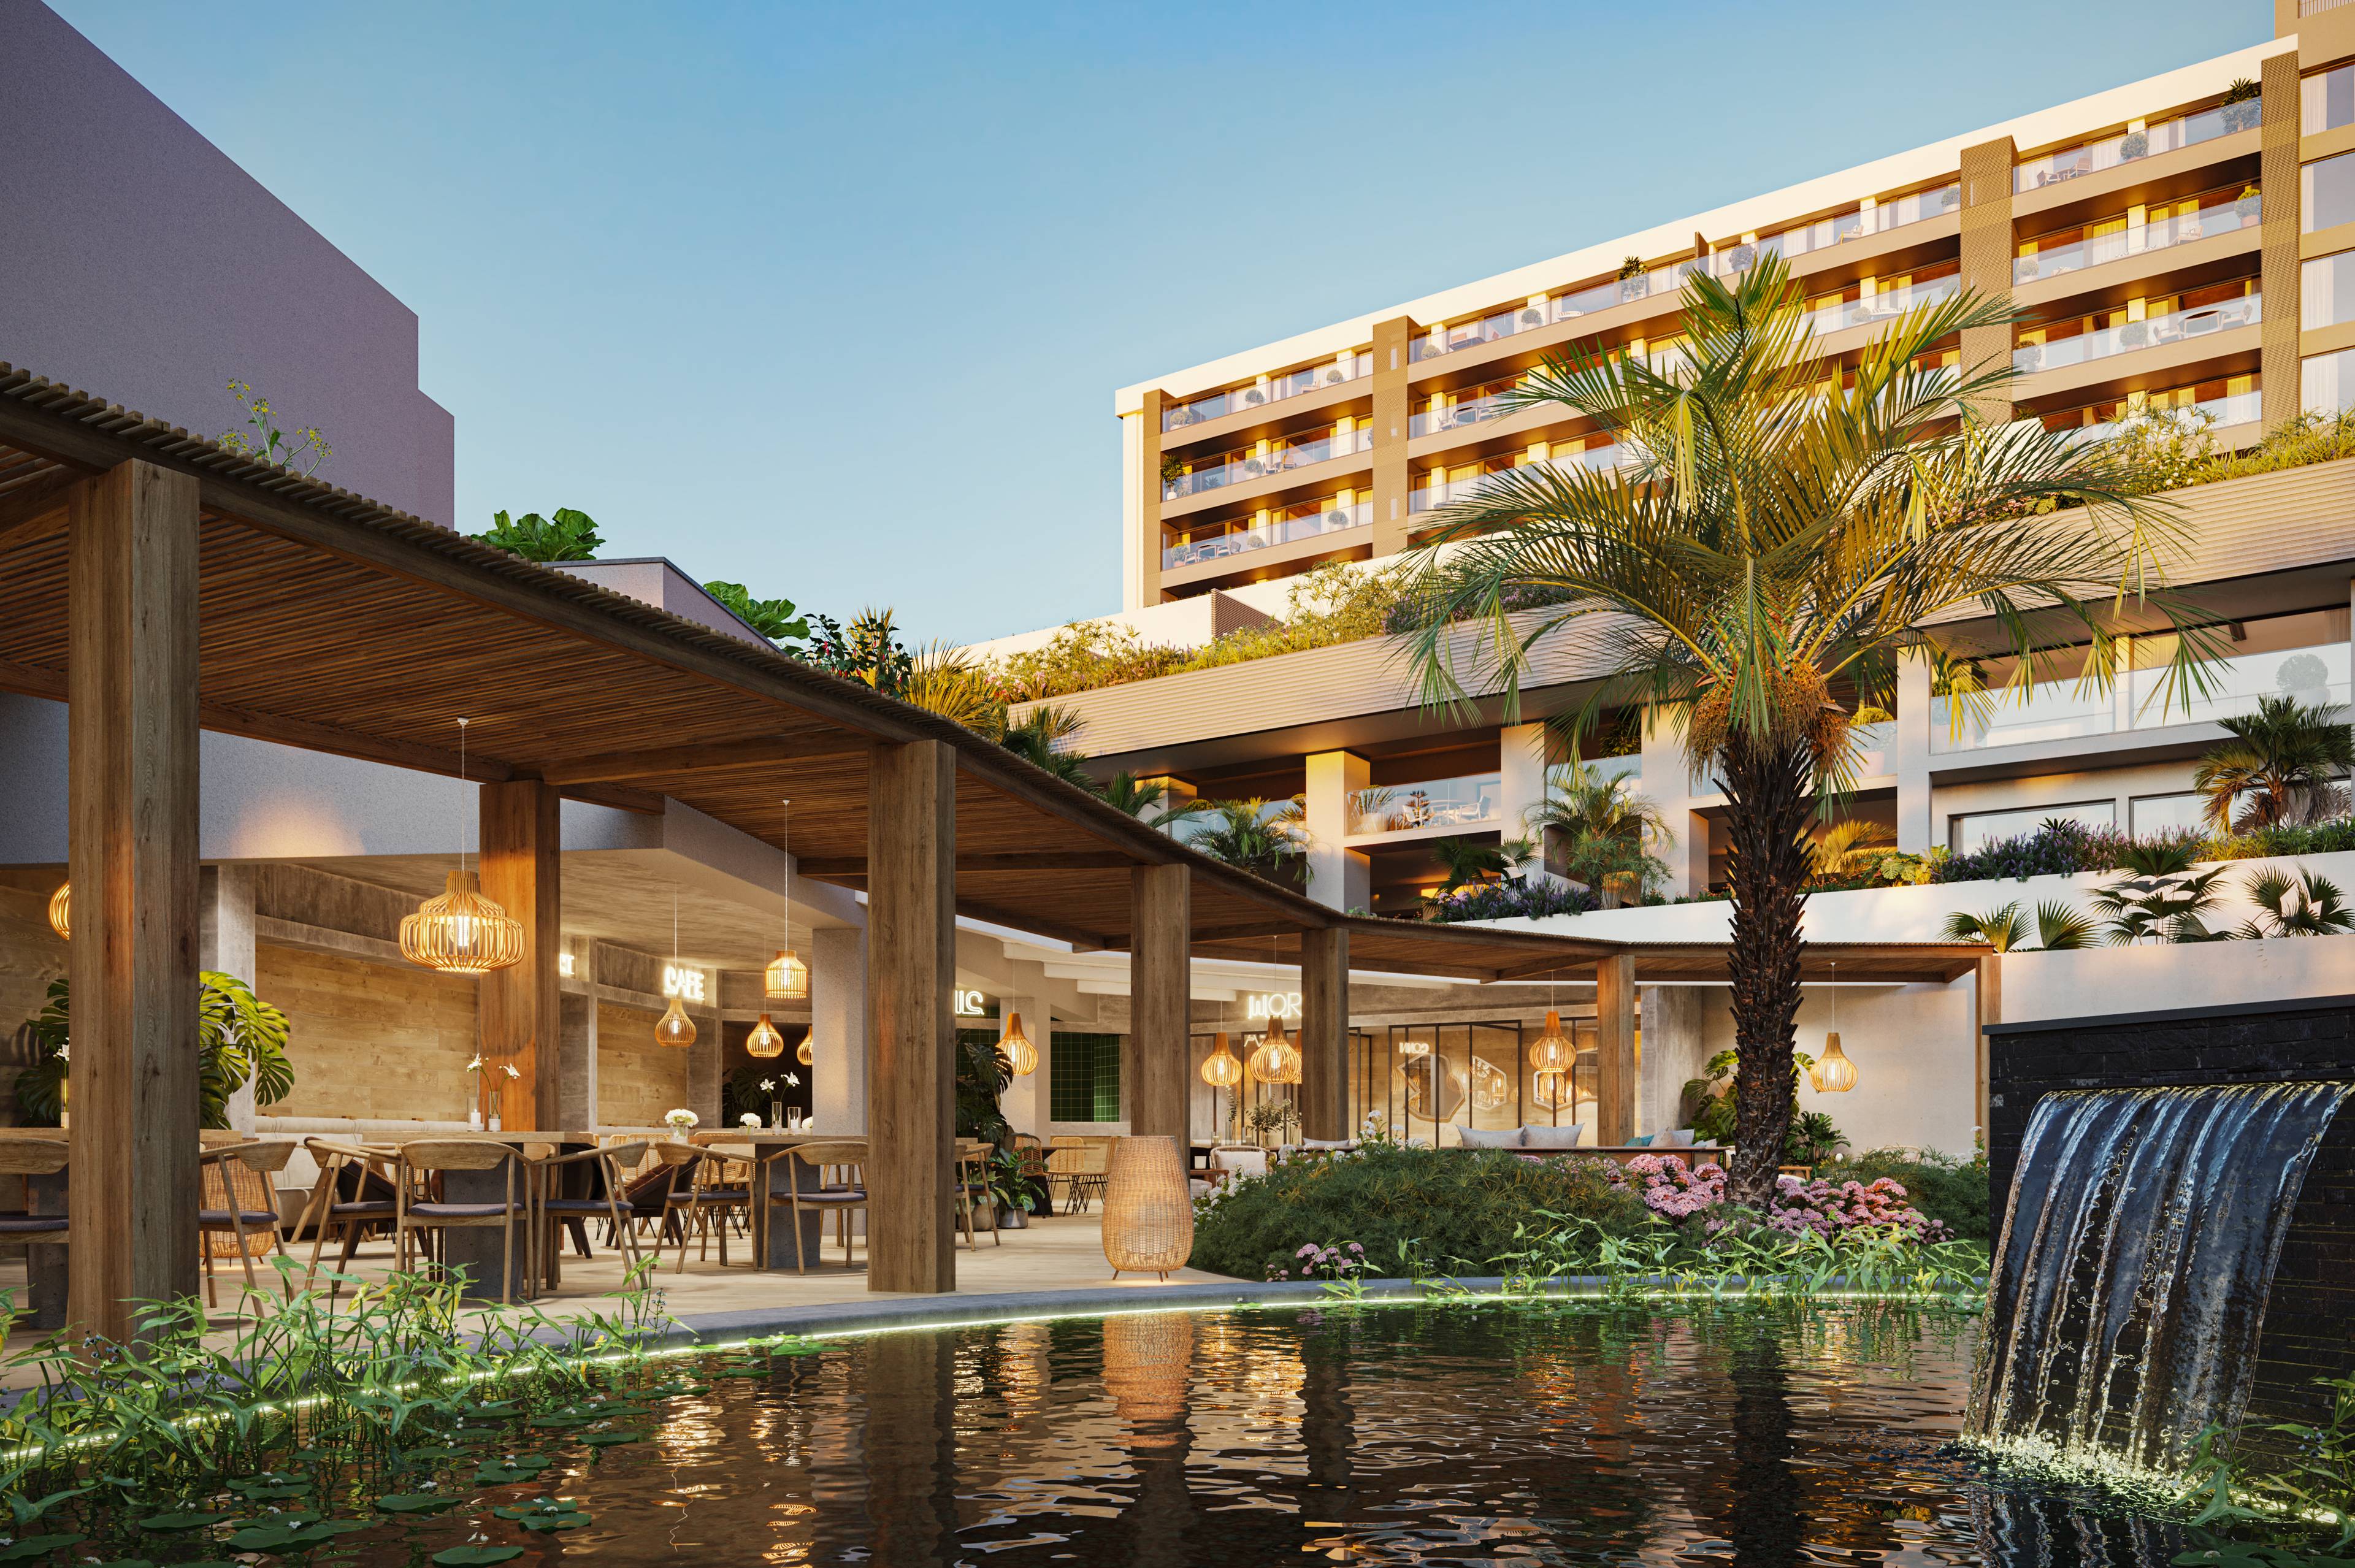 2 Bedroom Apartments - Sophisticated, elegant and modern in a exclusive condominium in Madeira